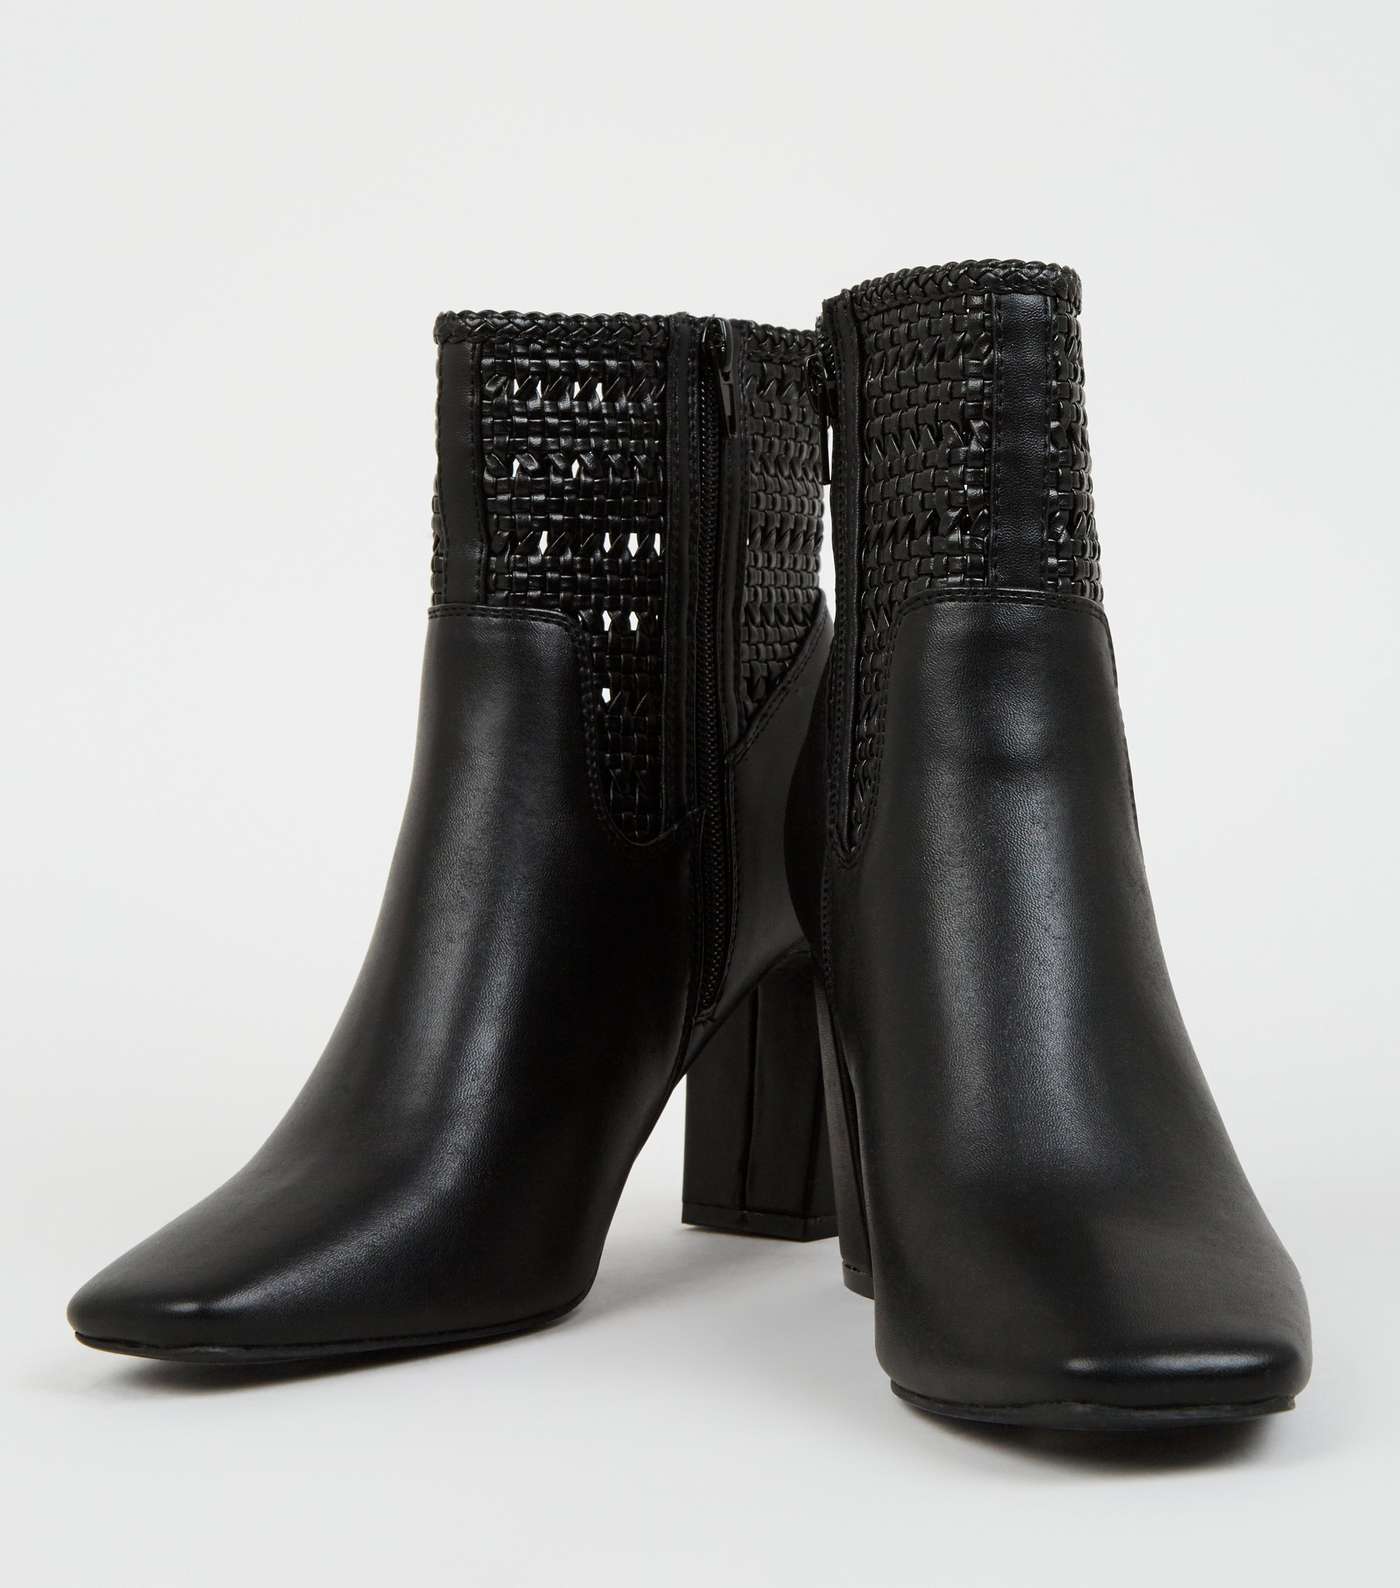 Black Leather-Look Woven Flare Heel Boots Image 3